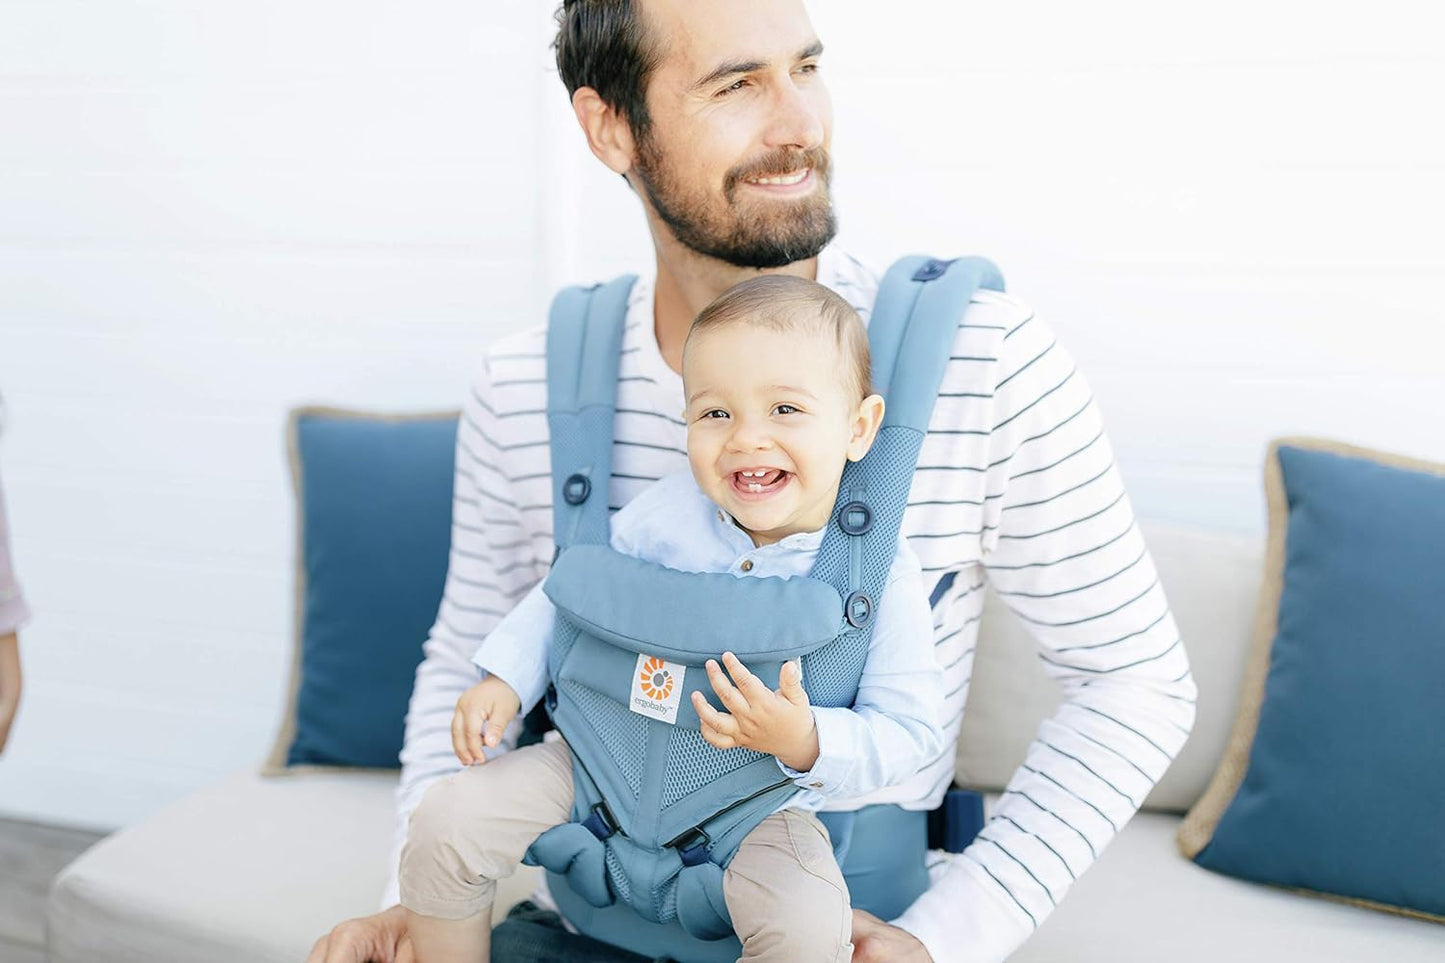 Ergobaby Omni 360 All-Position Baby Carrier for Newborn to Toddler with Lumbar Support & Cool Air Mesh (7-45 Lb), Onyx Black 6.18x9.13x10.43 Inch (Pack of 1)